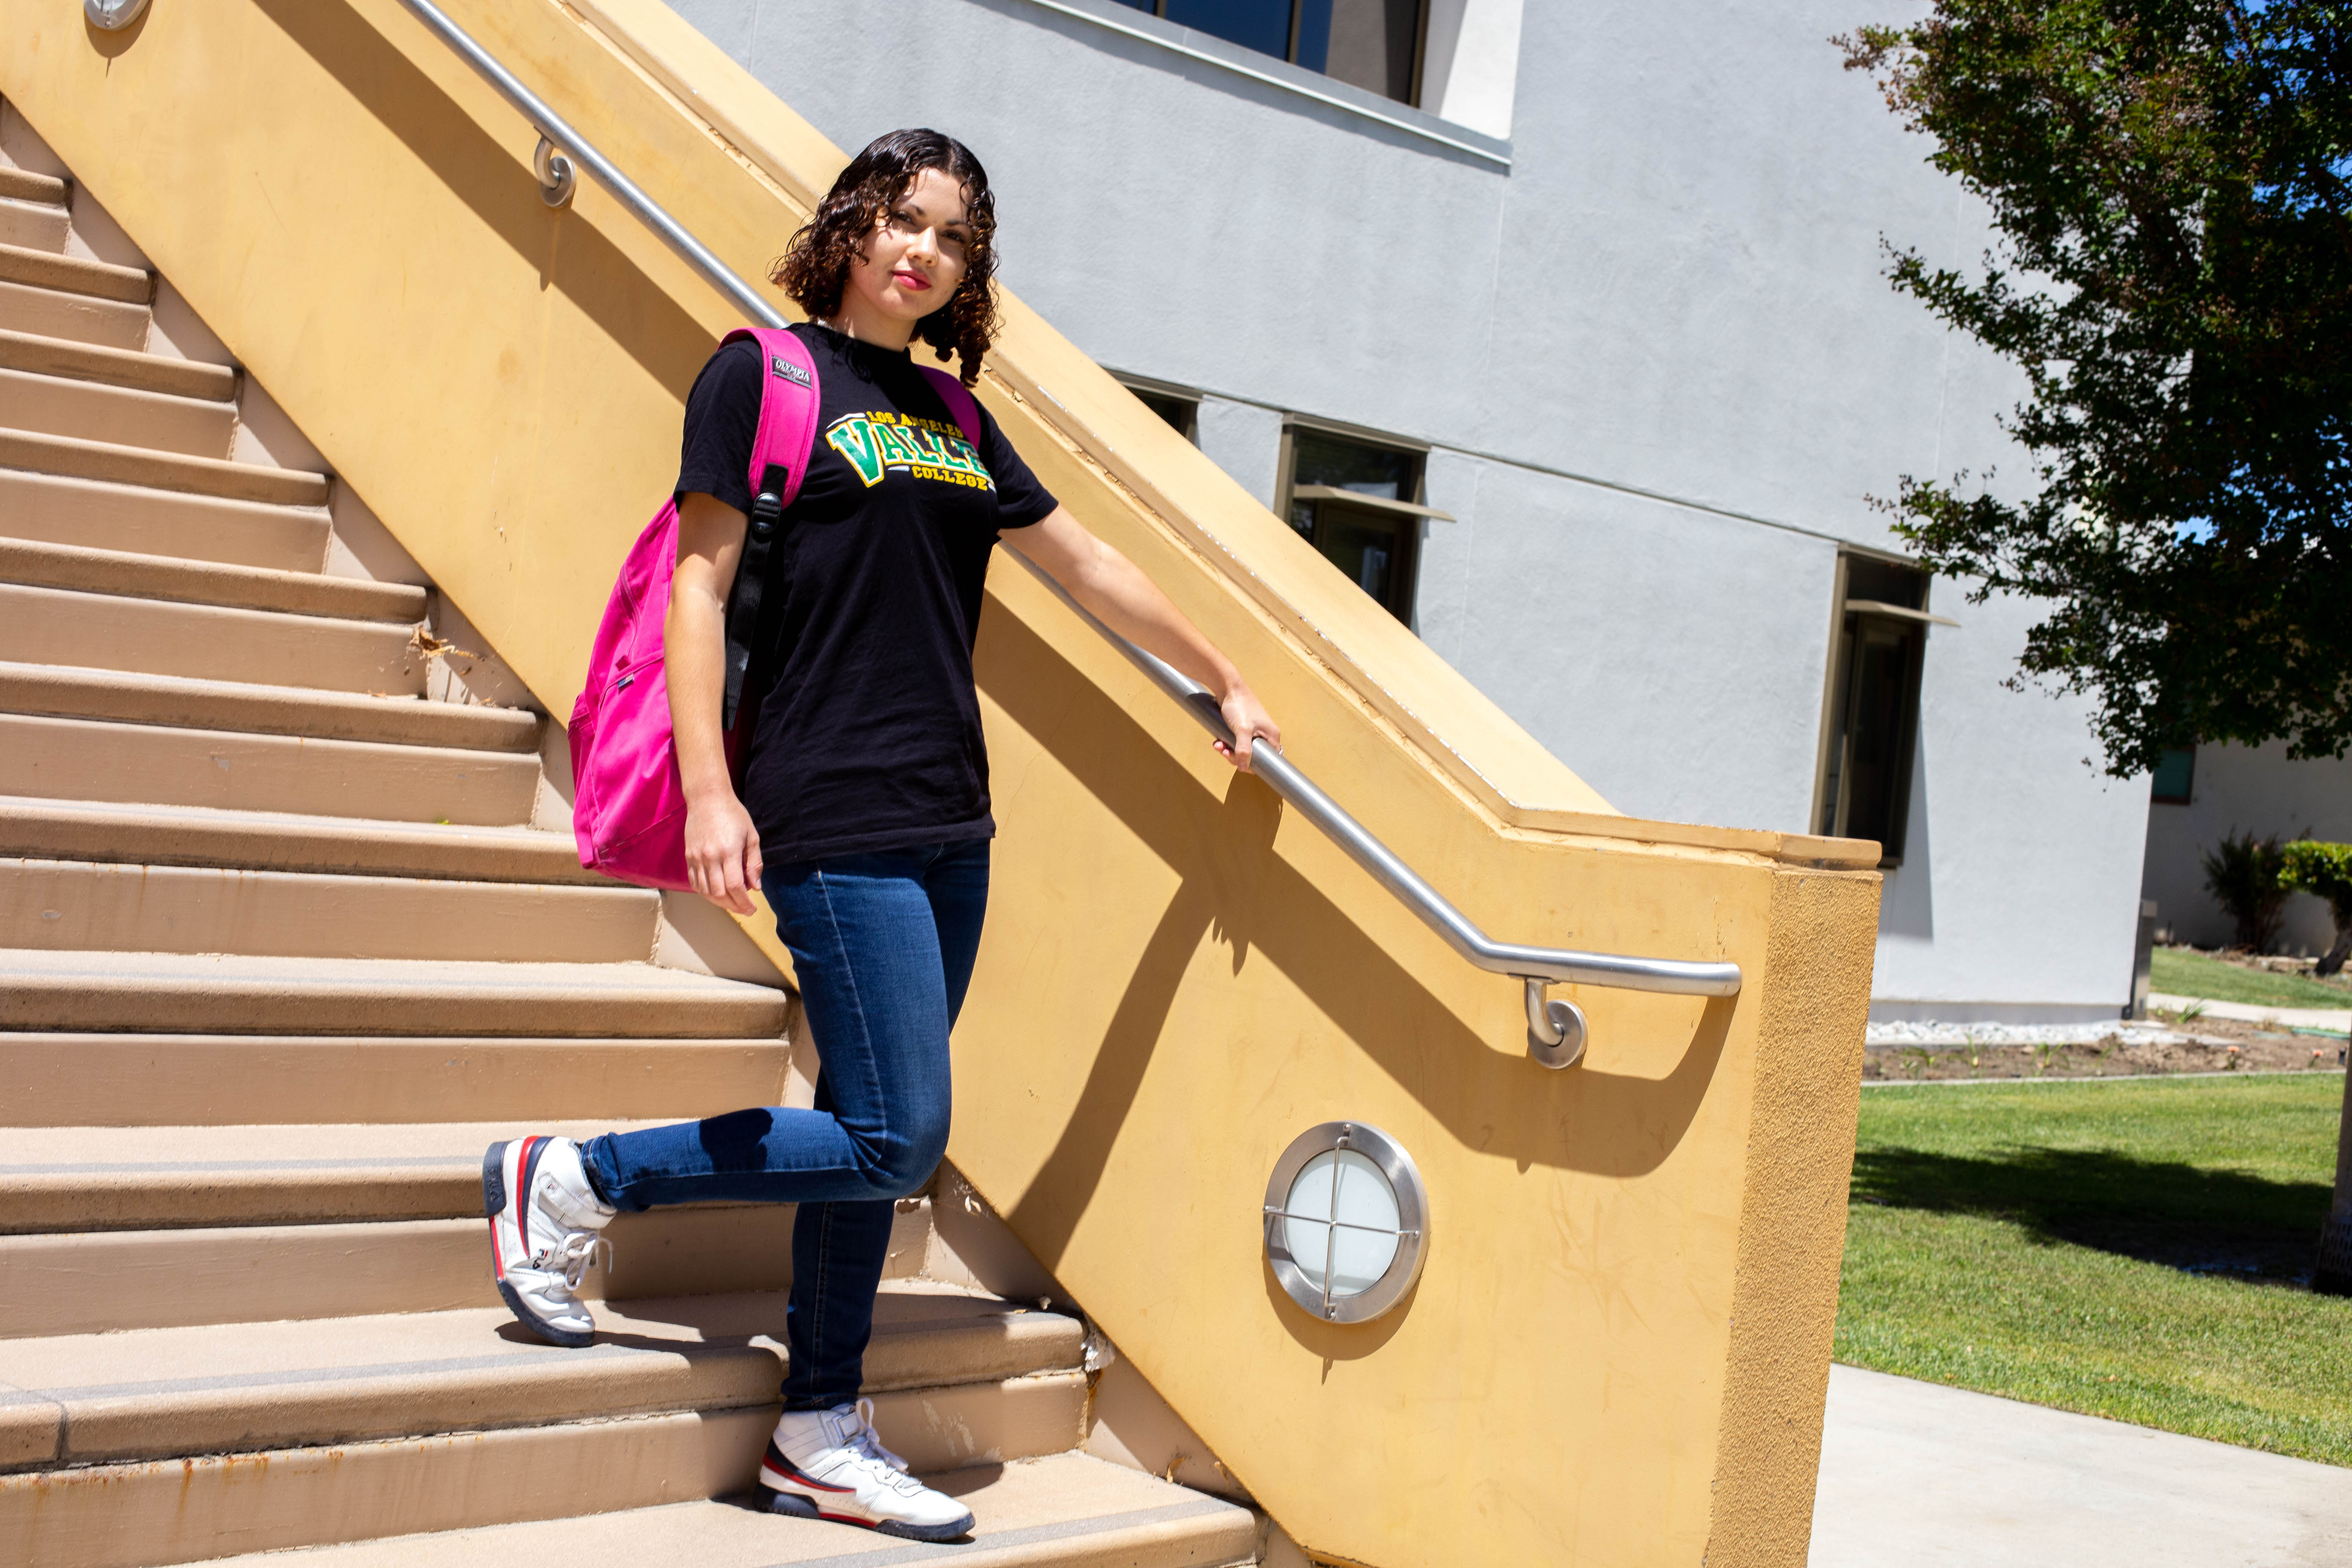 Student Girl in Stairs Walking Down